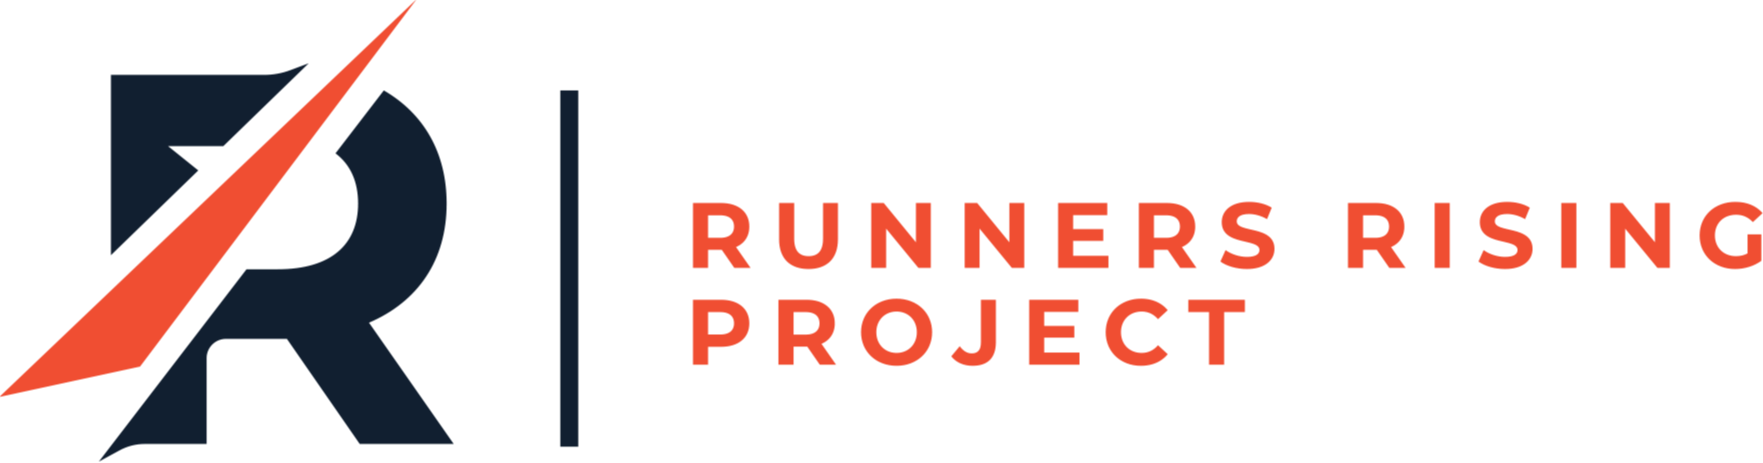 Runners Rising Project, Inc.